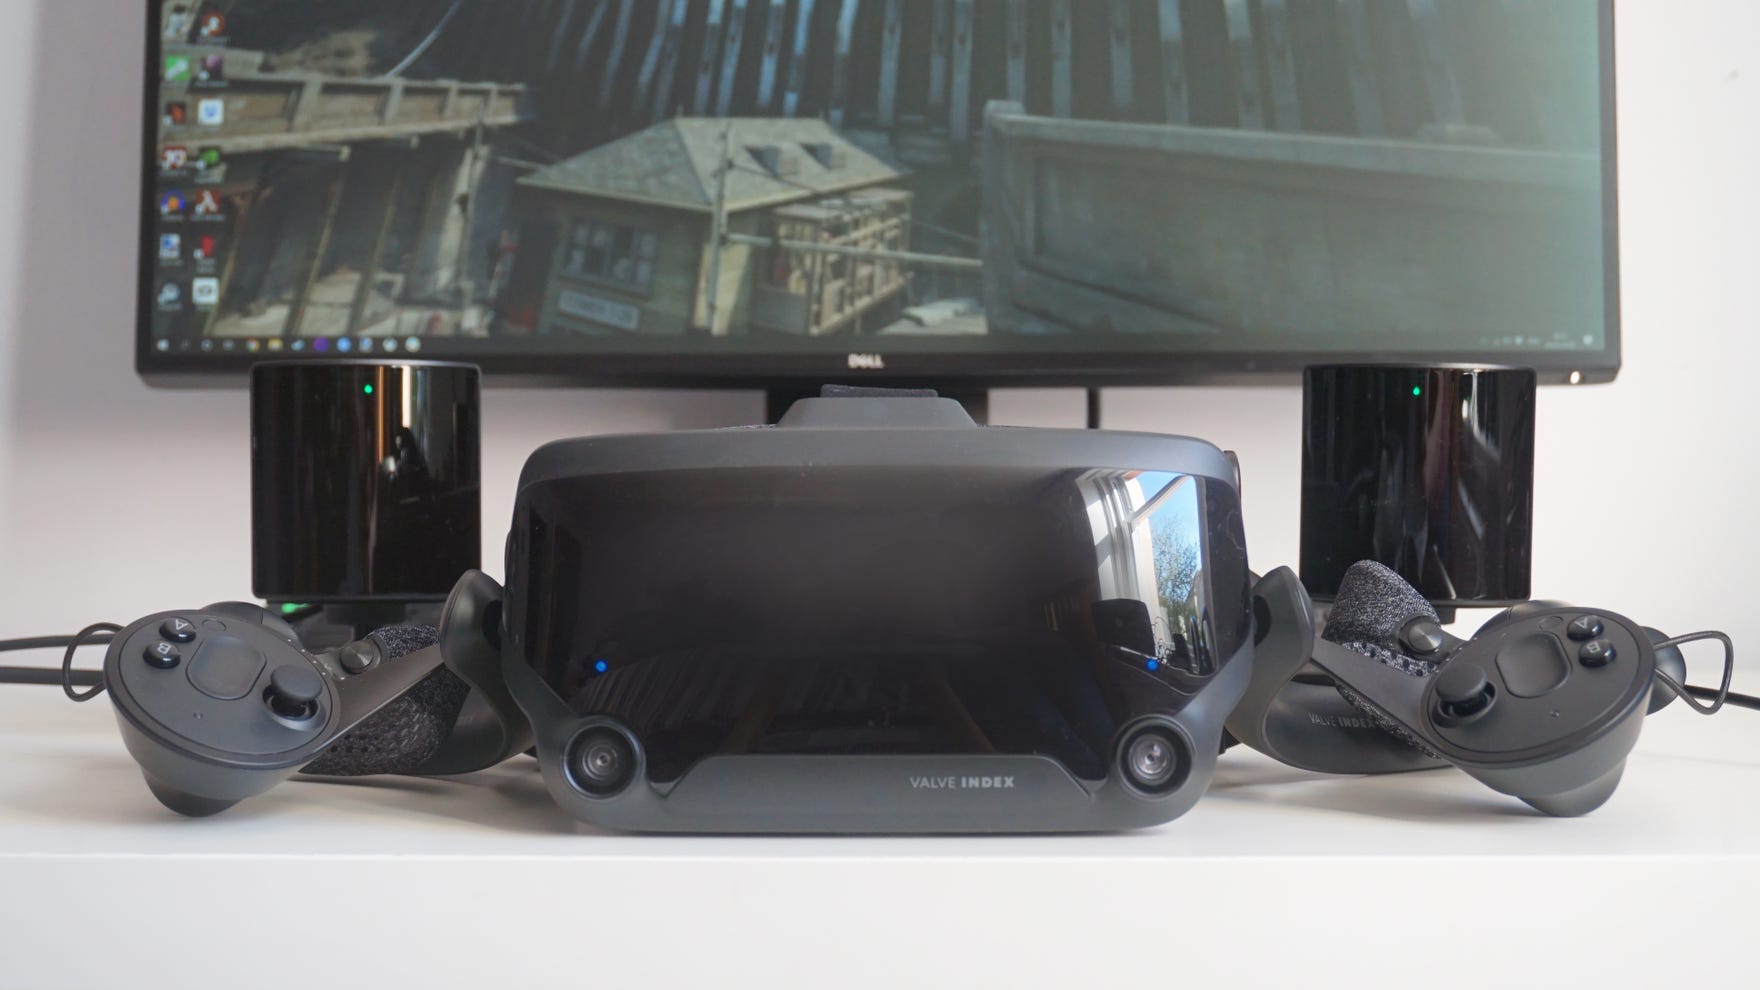 Valve's Index VR headset kit is available for $599.99 refurbished from ...